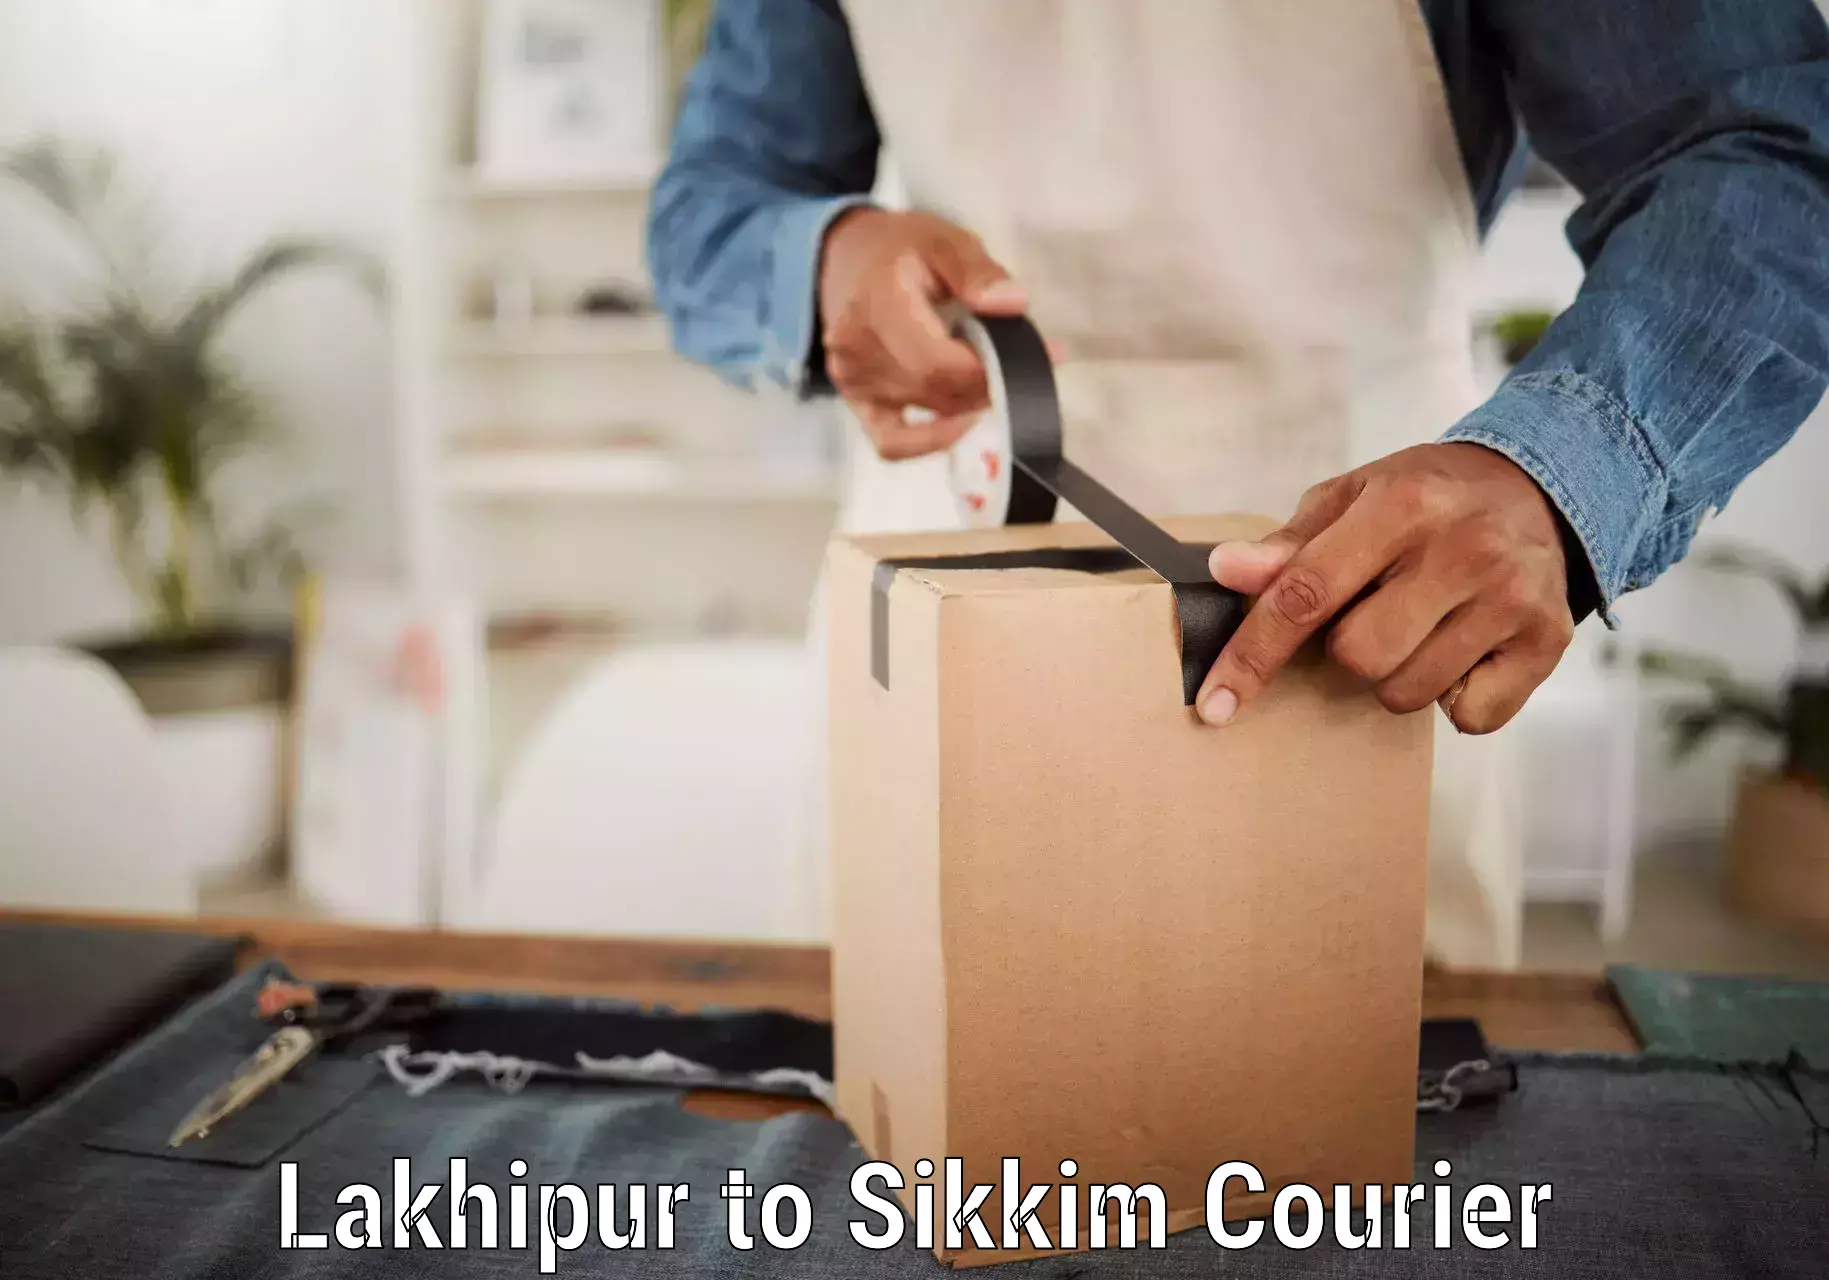 Next-day delivery options Lakhipur to Sikkim